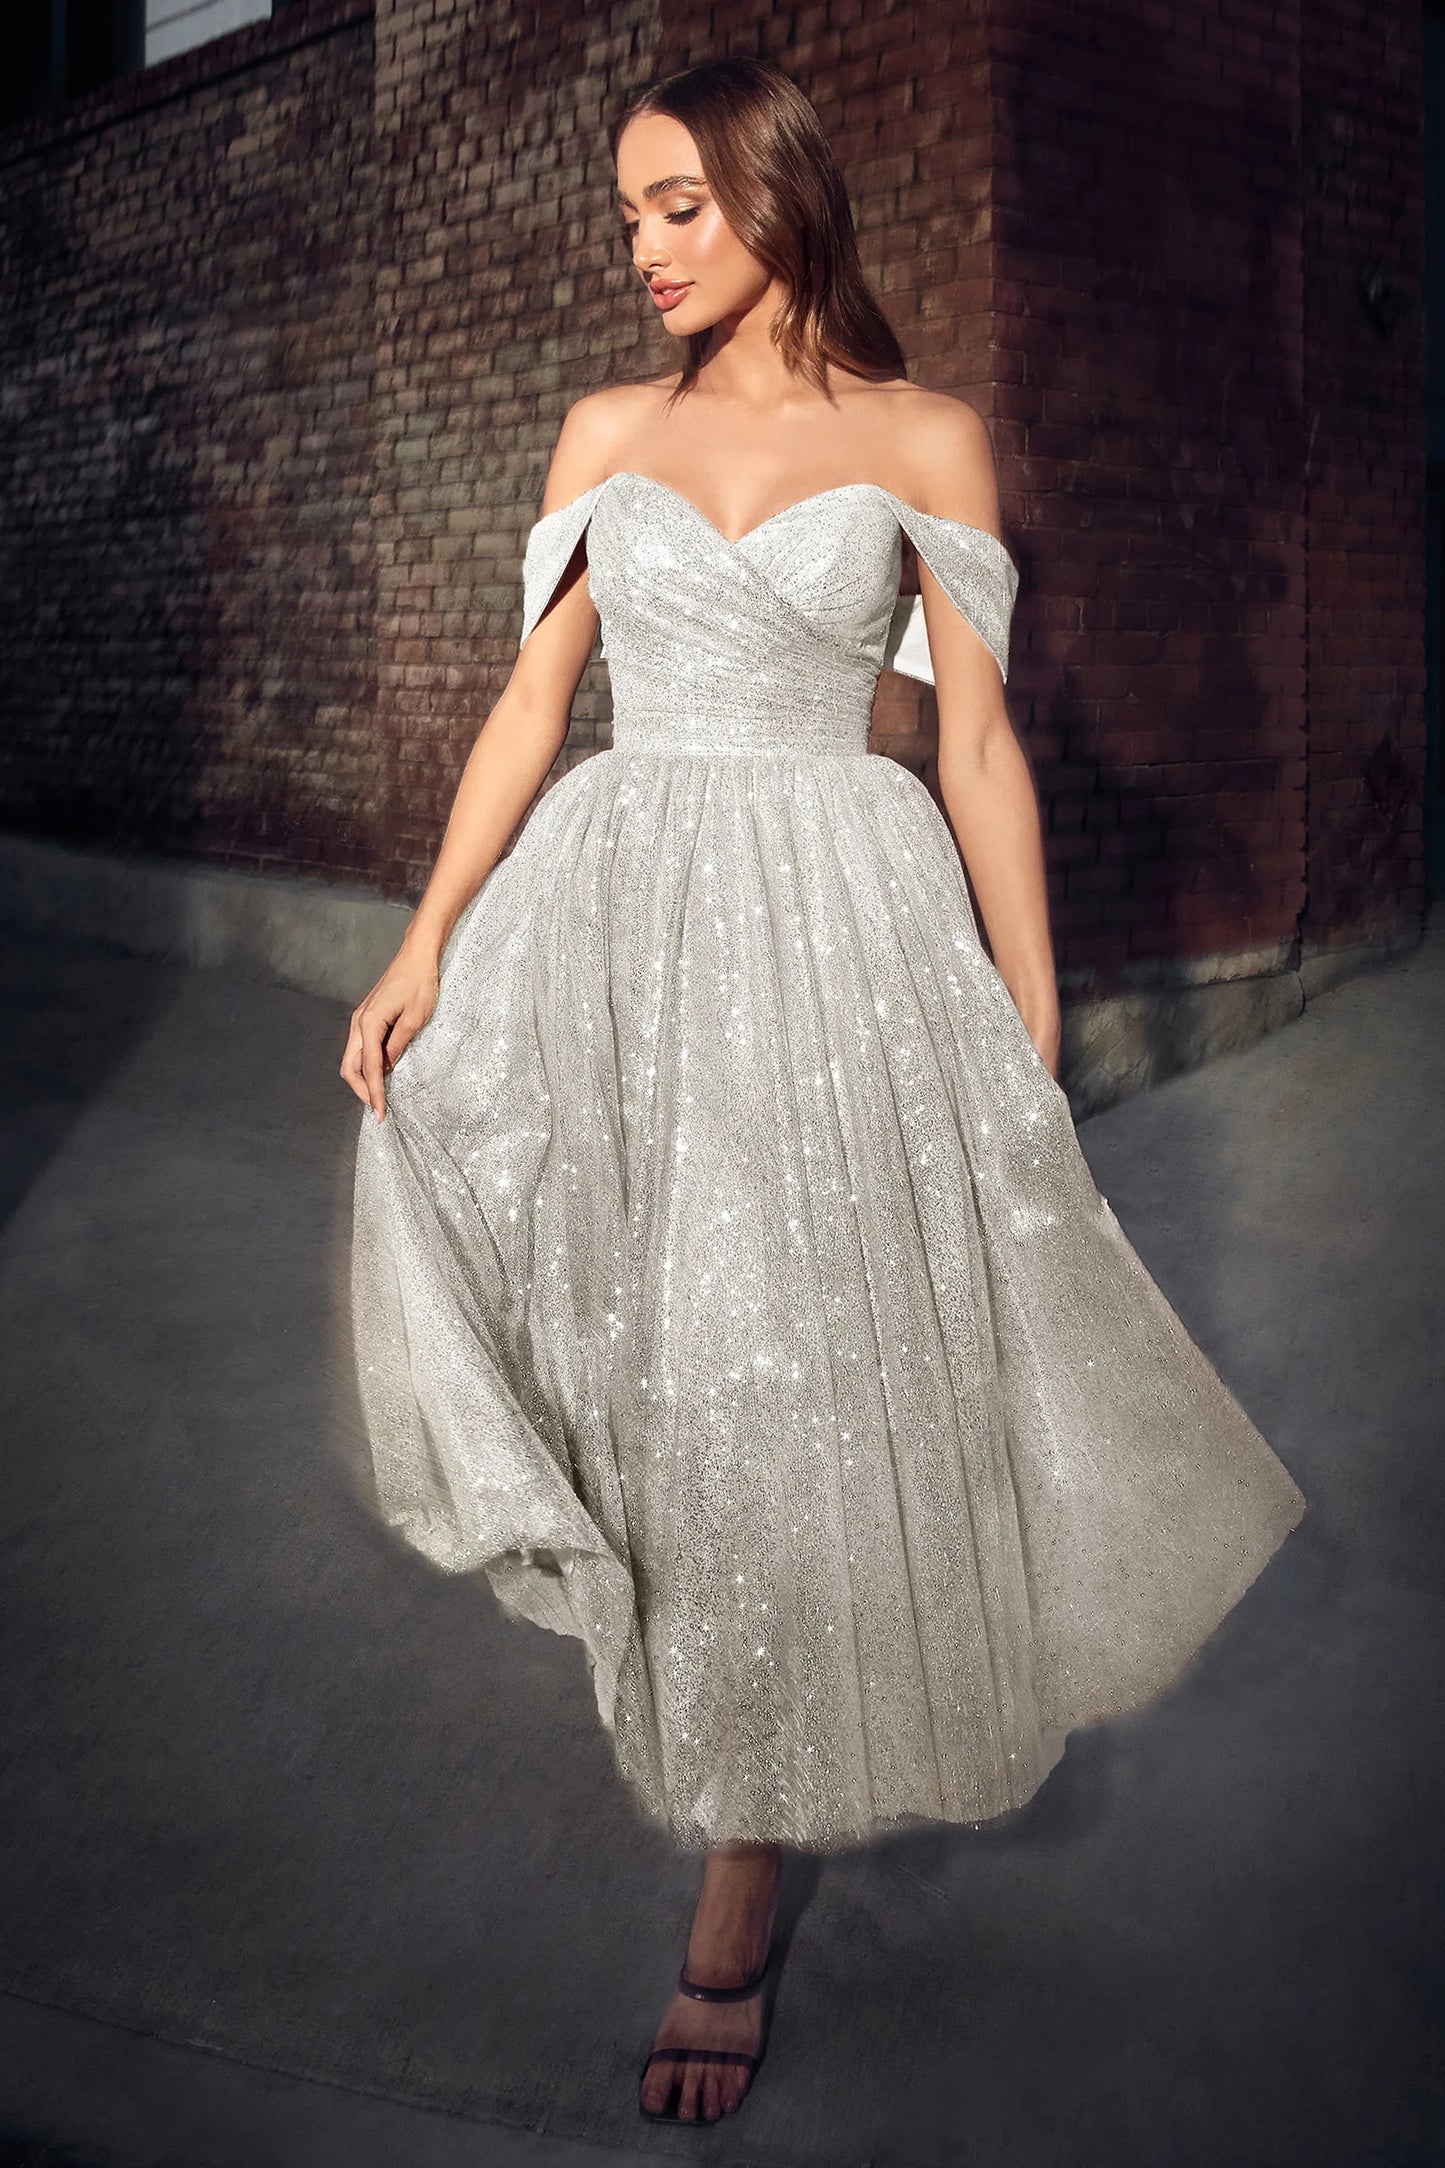 Ladivine CD869W Tea Length off the shoulder glitter Reception Cocktail Dress Formal Sweetheart Every bride-to-be should be able to express her style and beauty while also looking elegant and sophisticated on her special day.  This show-stopping piece features a tea length silhouette, an off the shoulder bodice with an alluring sweetheart neckline, and glitter flocked fabric that twinkles in the light - perfect for an engagement, elopement, or rehearsal dinner dress.  Cinderella Divine